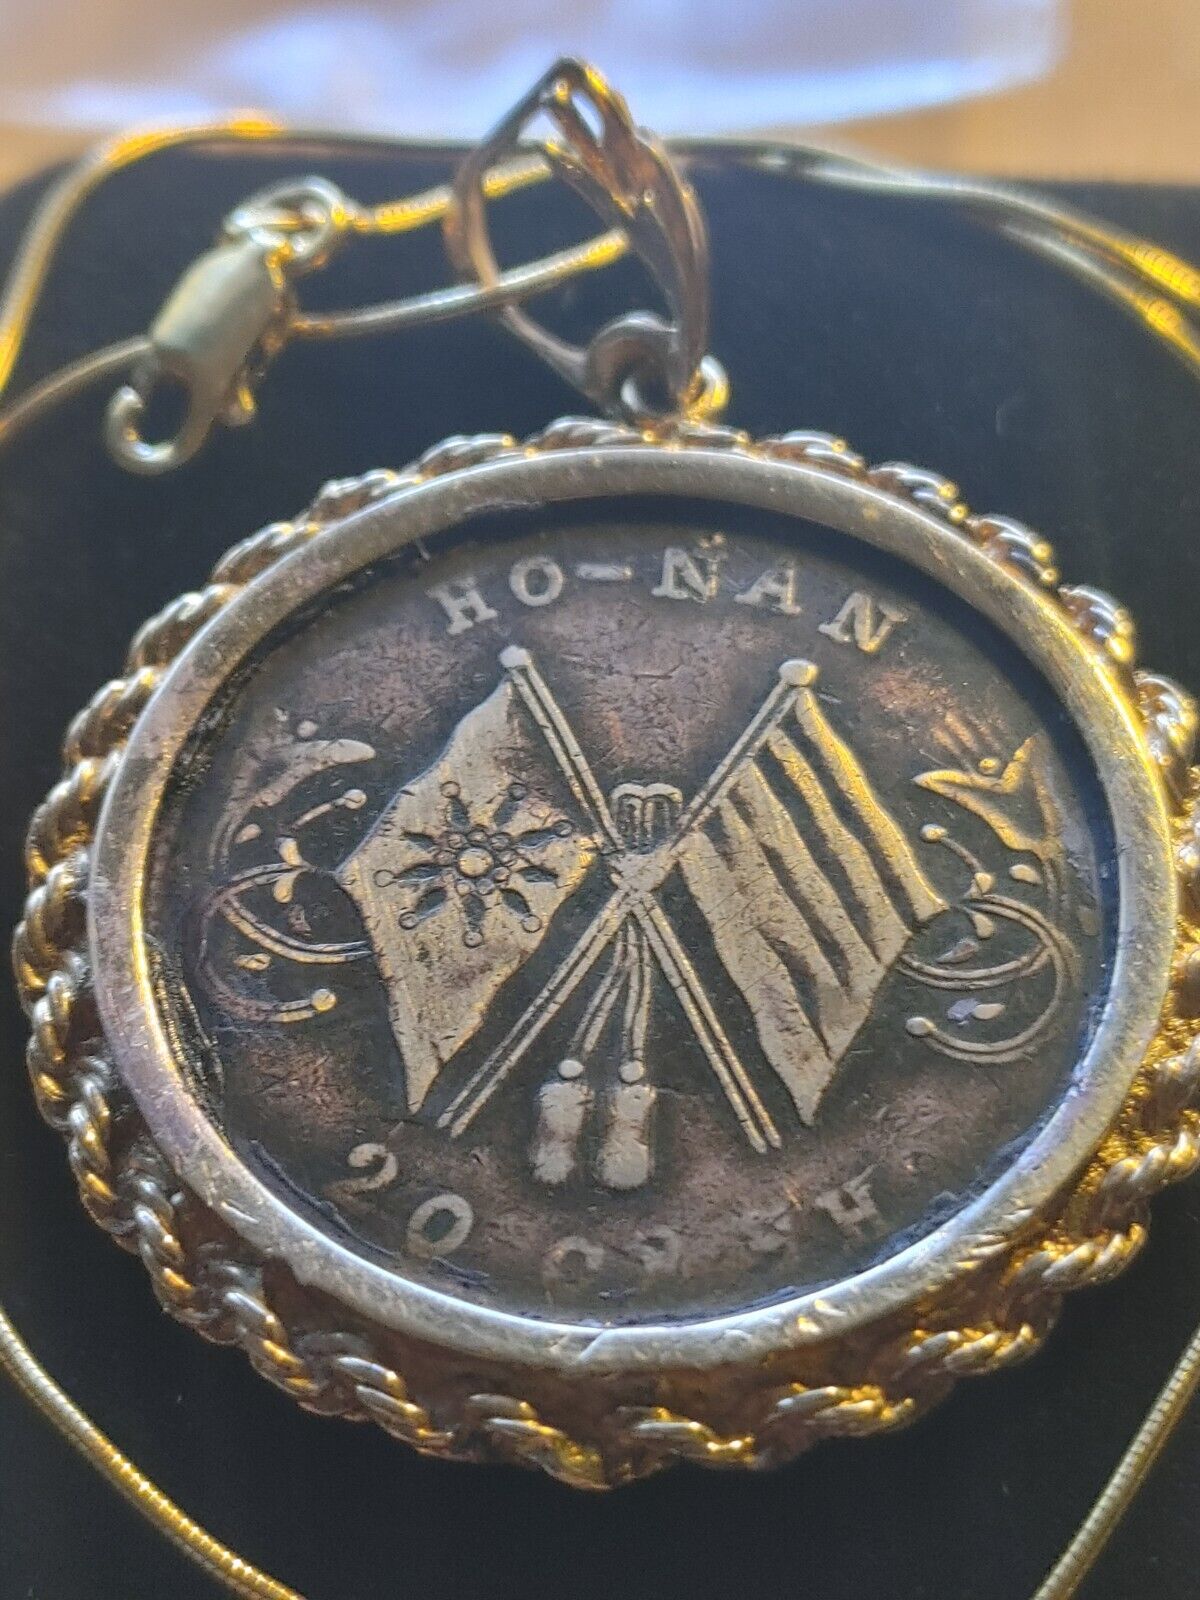 1920 Flags Of The Wu Chang Uprising Honan Province Coin Pendant Genuine gilded  Everymagicalday